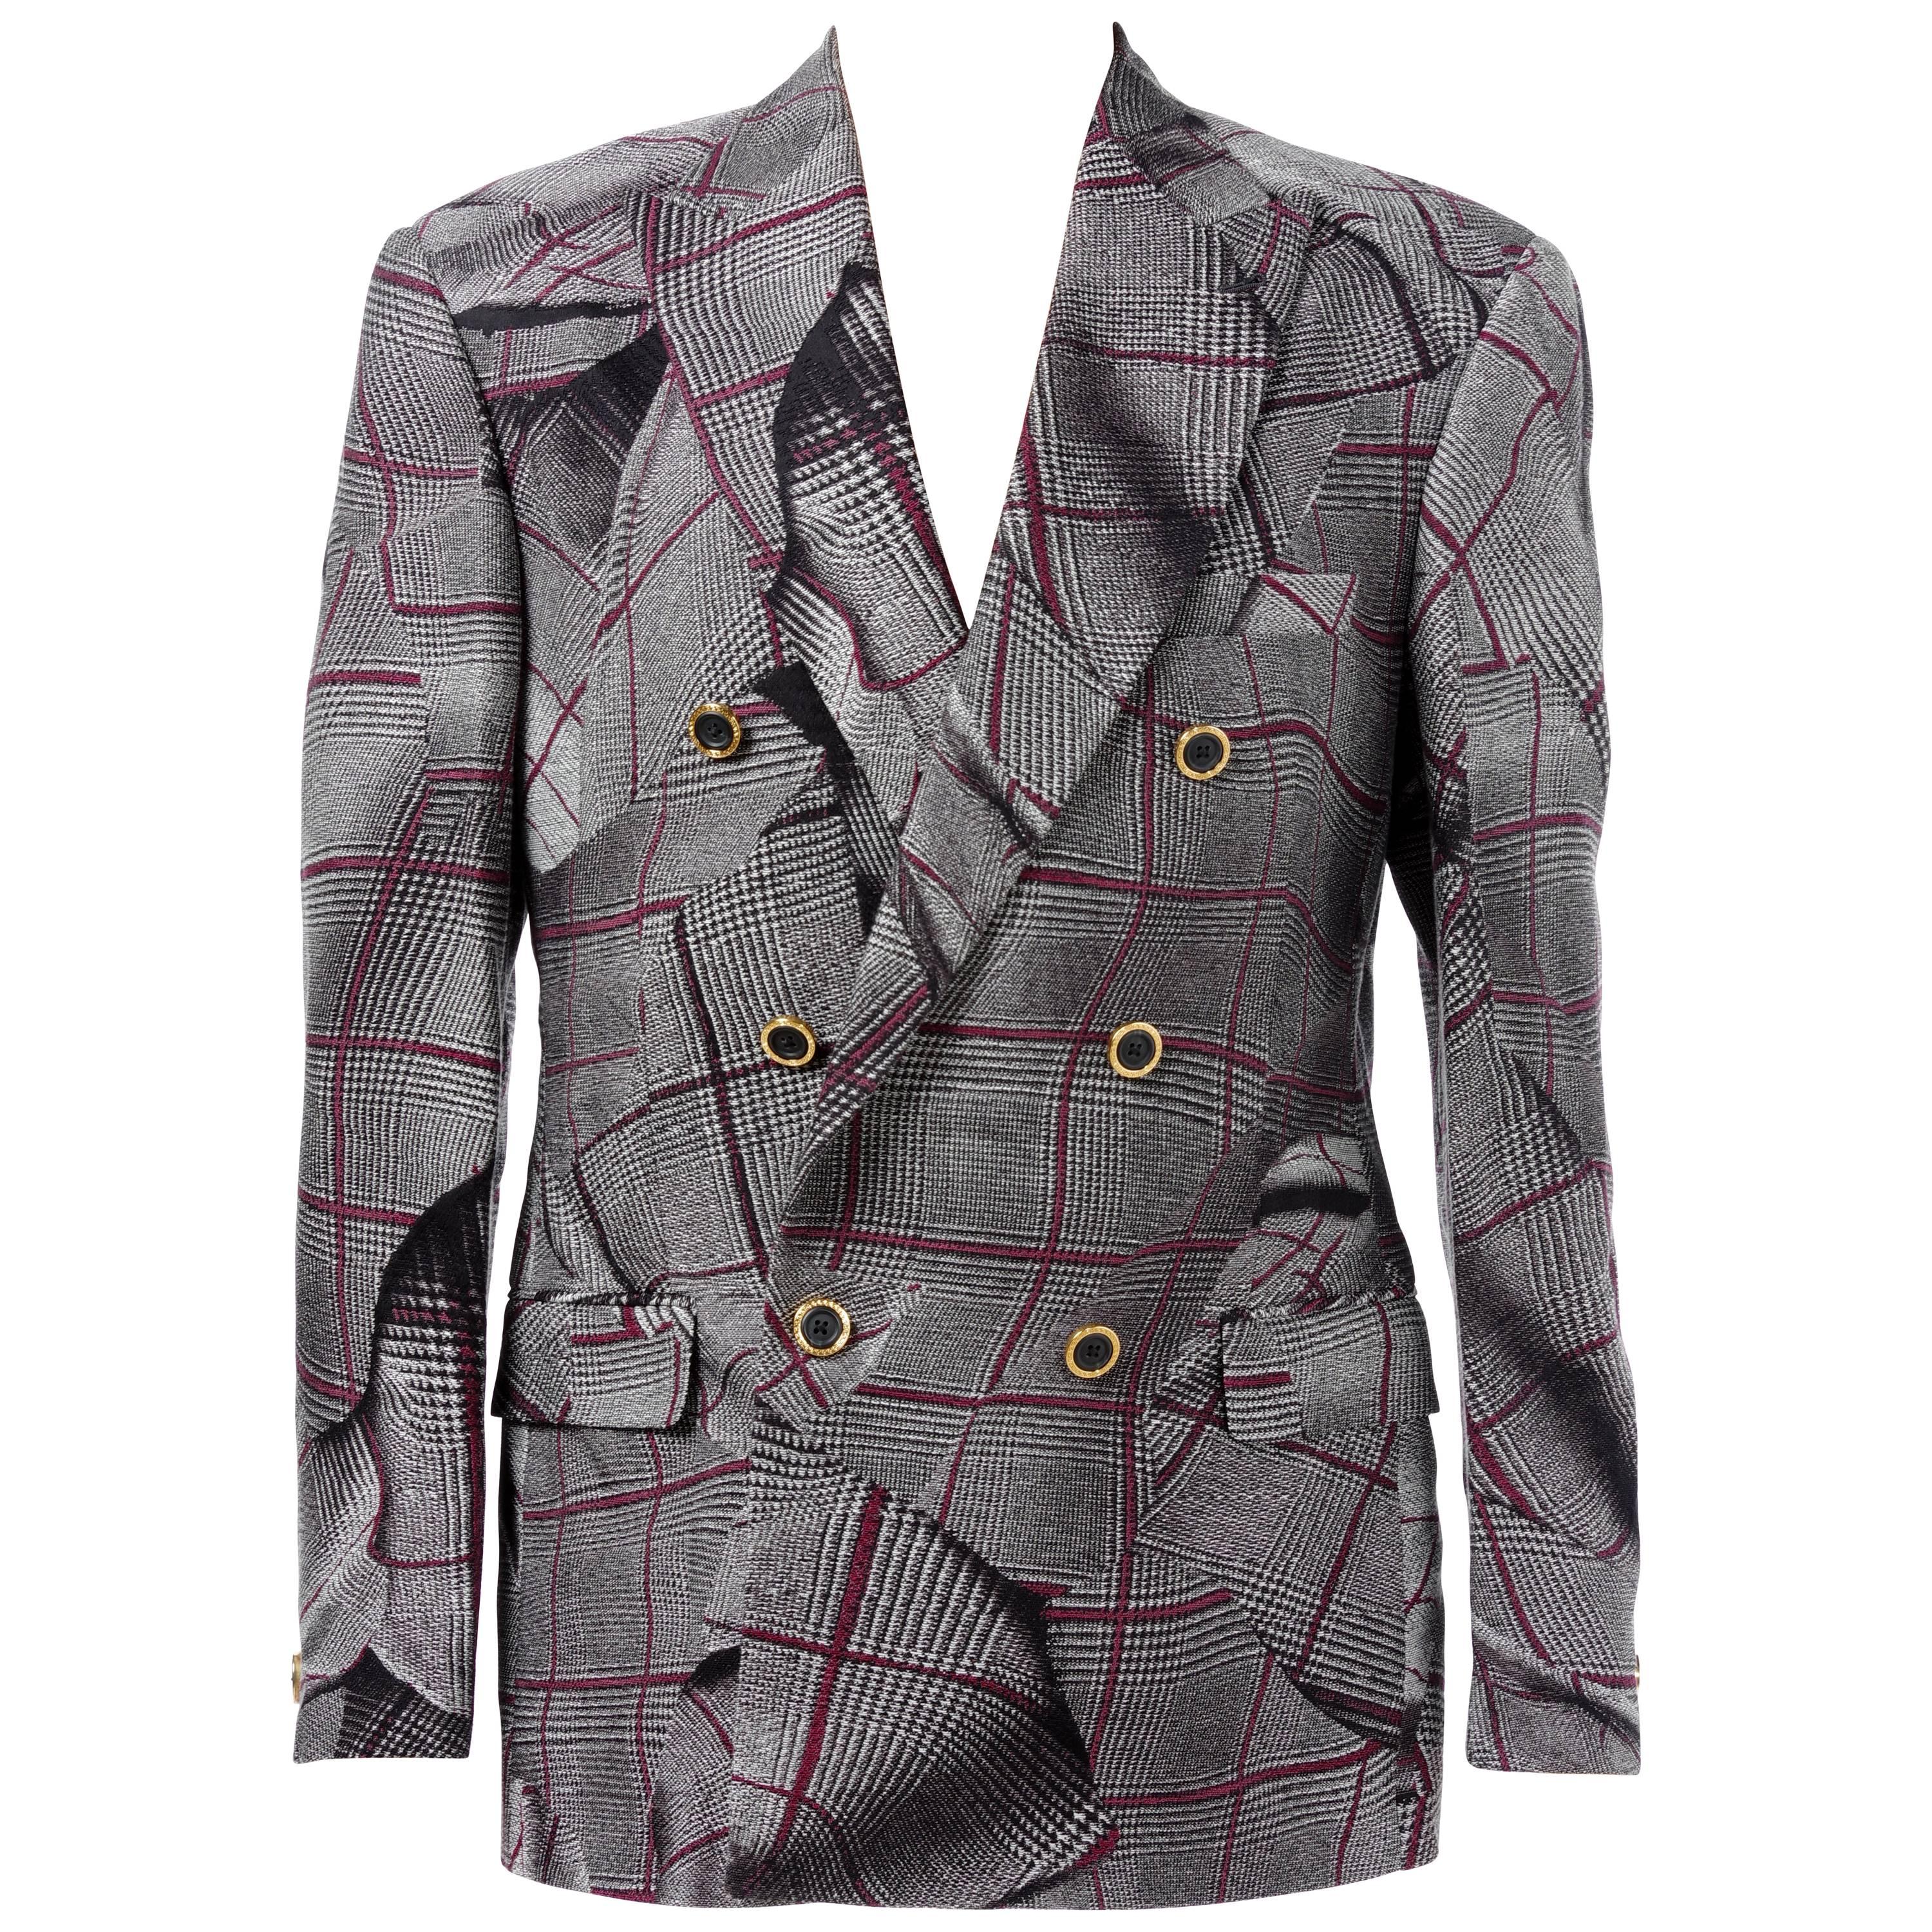 BRAND NEW VERSACE DOUBLE BREASTED WINDOWPANE TAILOR MADE SUIT for MEN